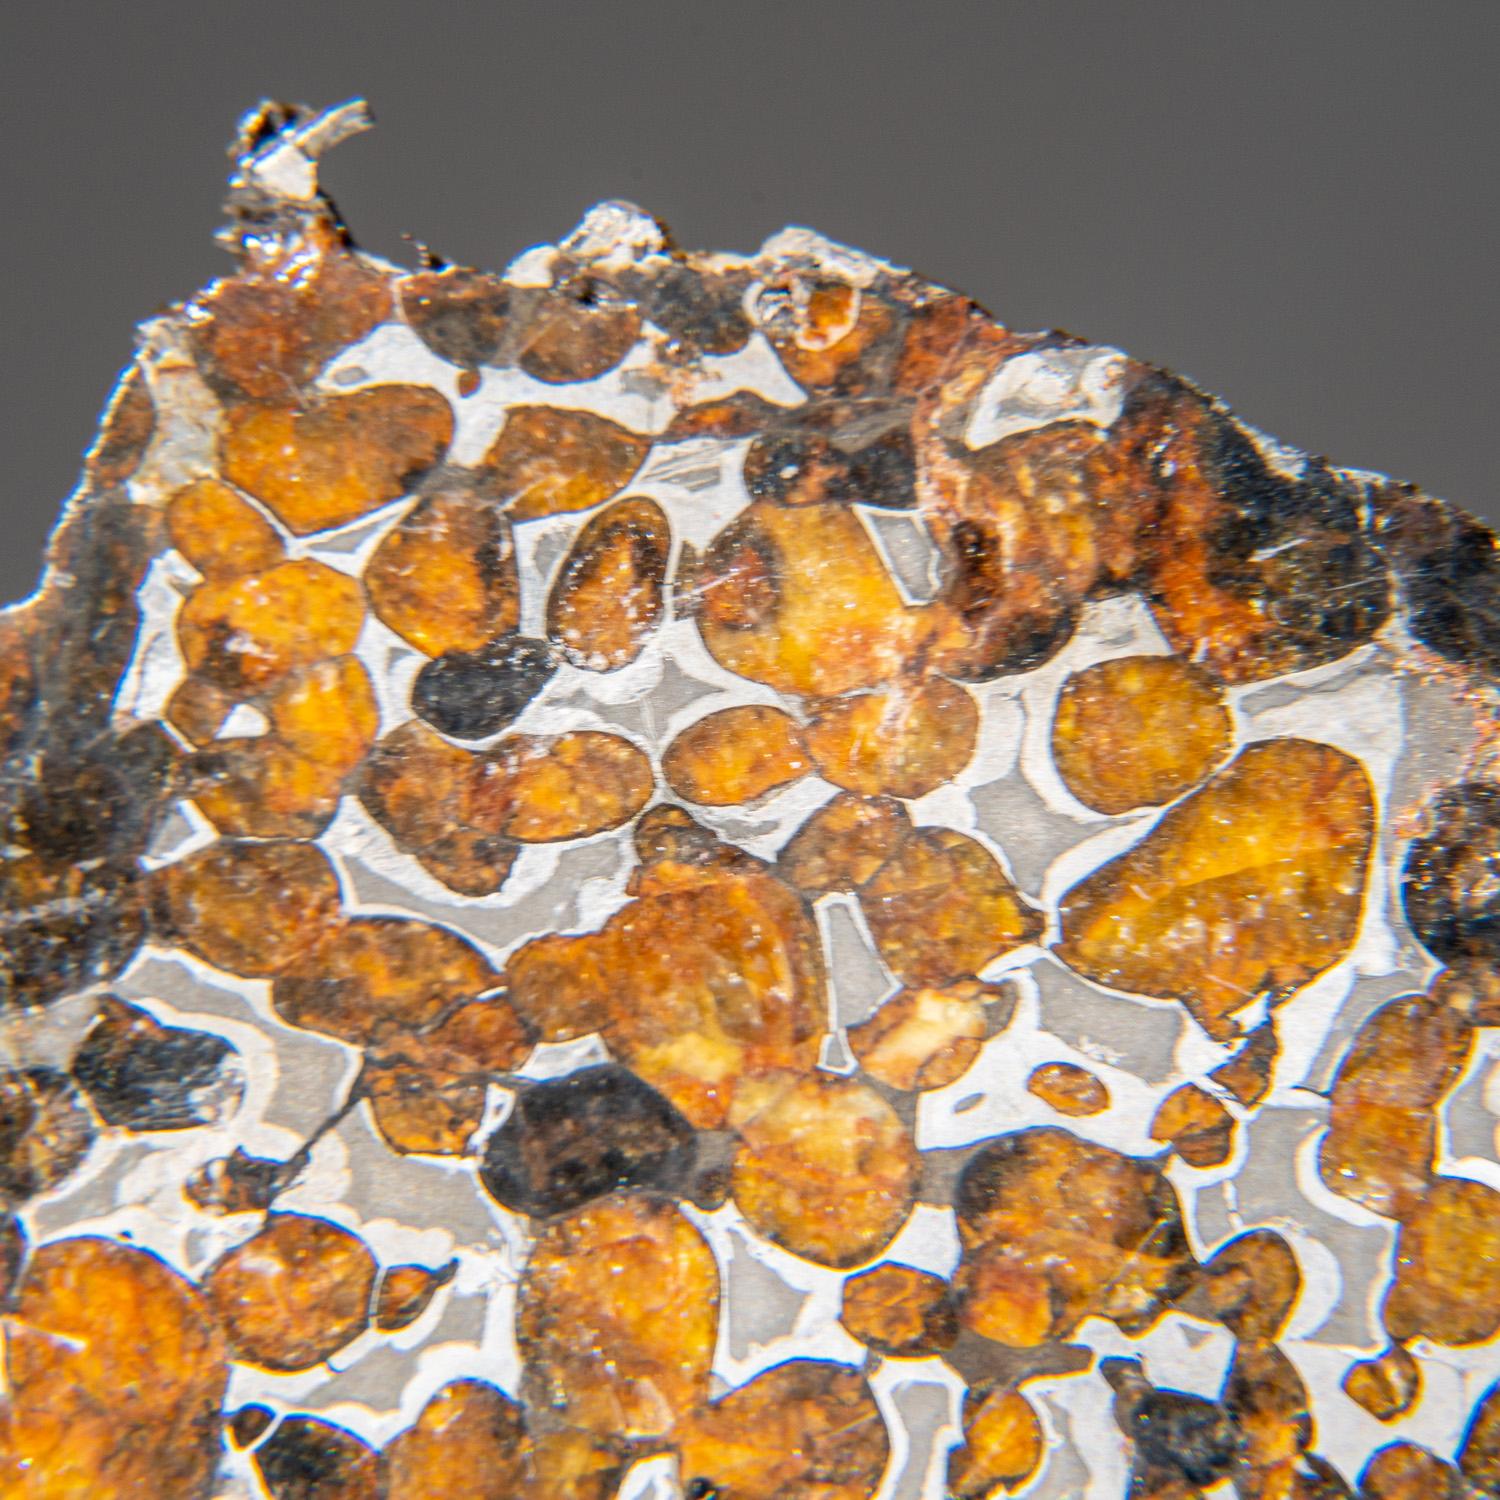 In 2016, large masses of the Sericho pallasite meteorite were acquired from villagers in Isiolo County, Kenya, marking its formal discovery. The olivine crystals range in colour from emerald green to orange and possess rounded shapes. The metal-rich